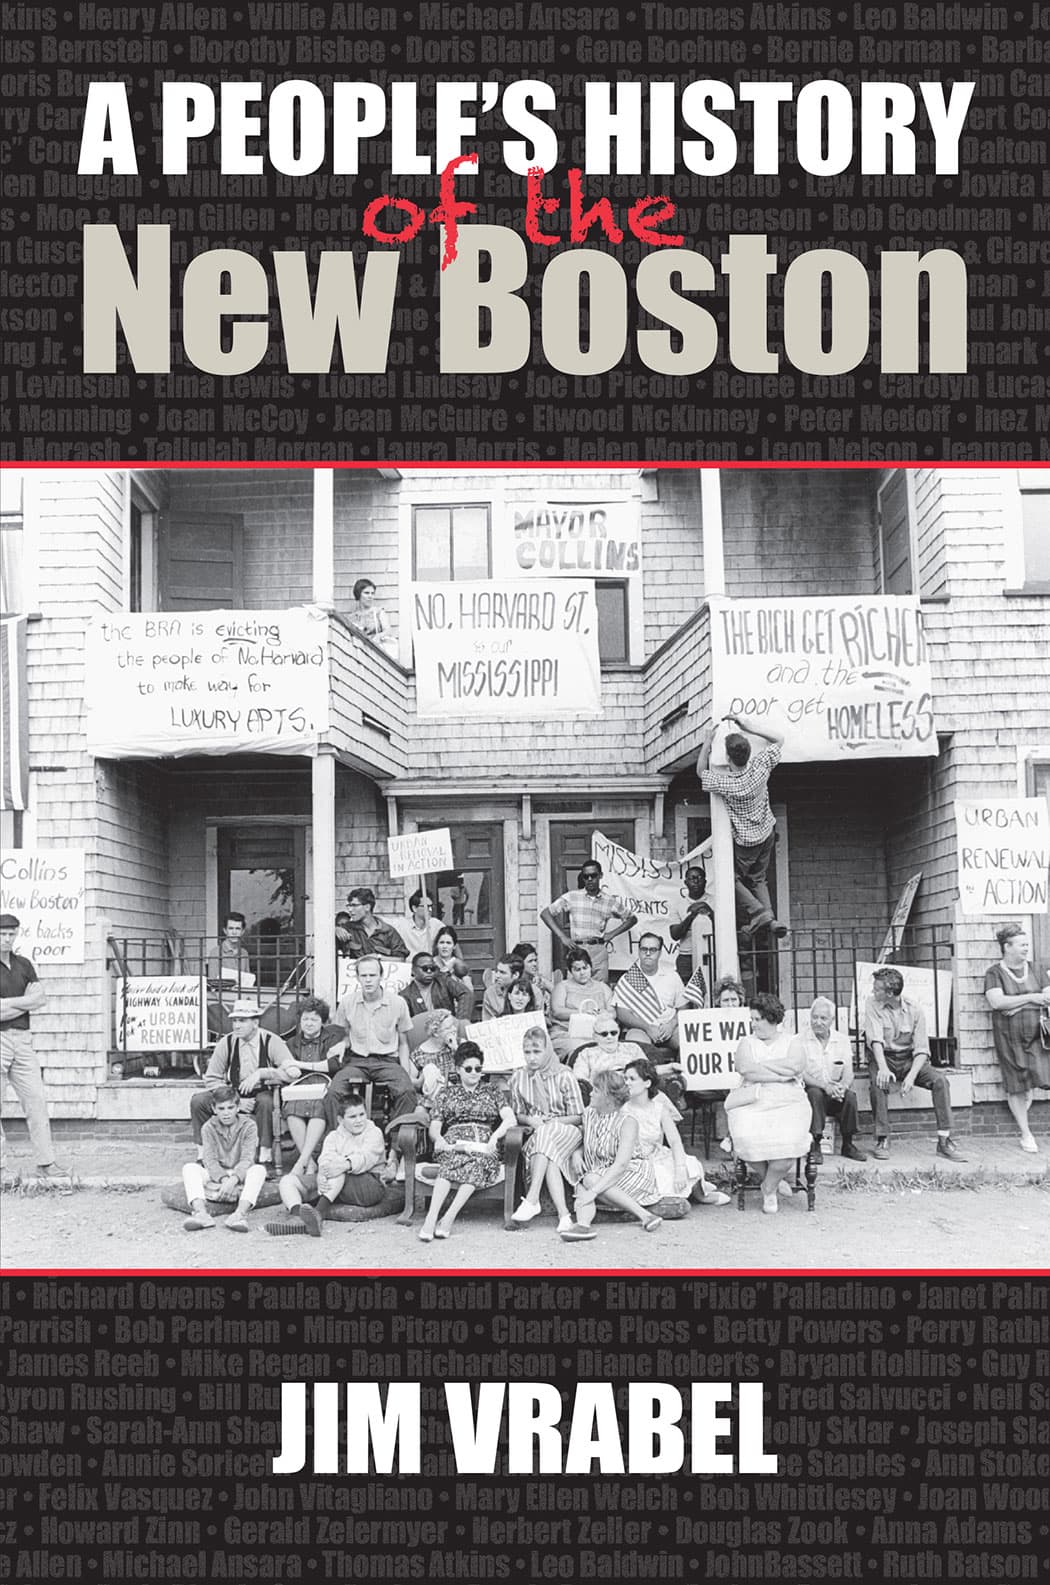 A People’s History of the New Boston” by Jim Vrabel. (Courtesy)